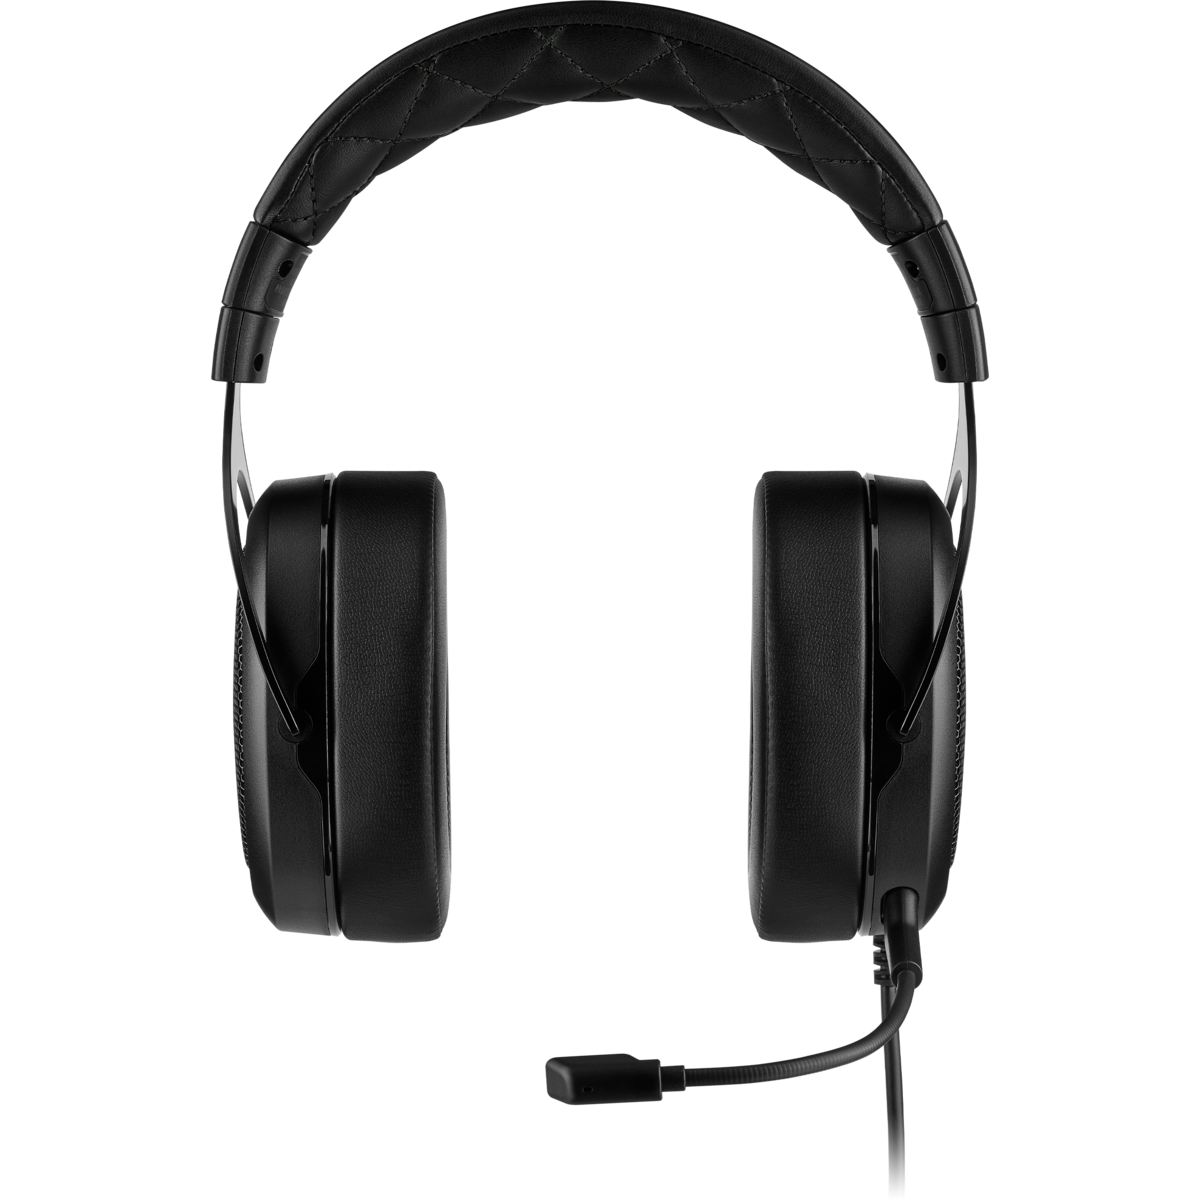 Load image into Gallery viewer, HS50 PRO STEREO Gaming Headset 電競遊戲耳機(黑色)
